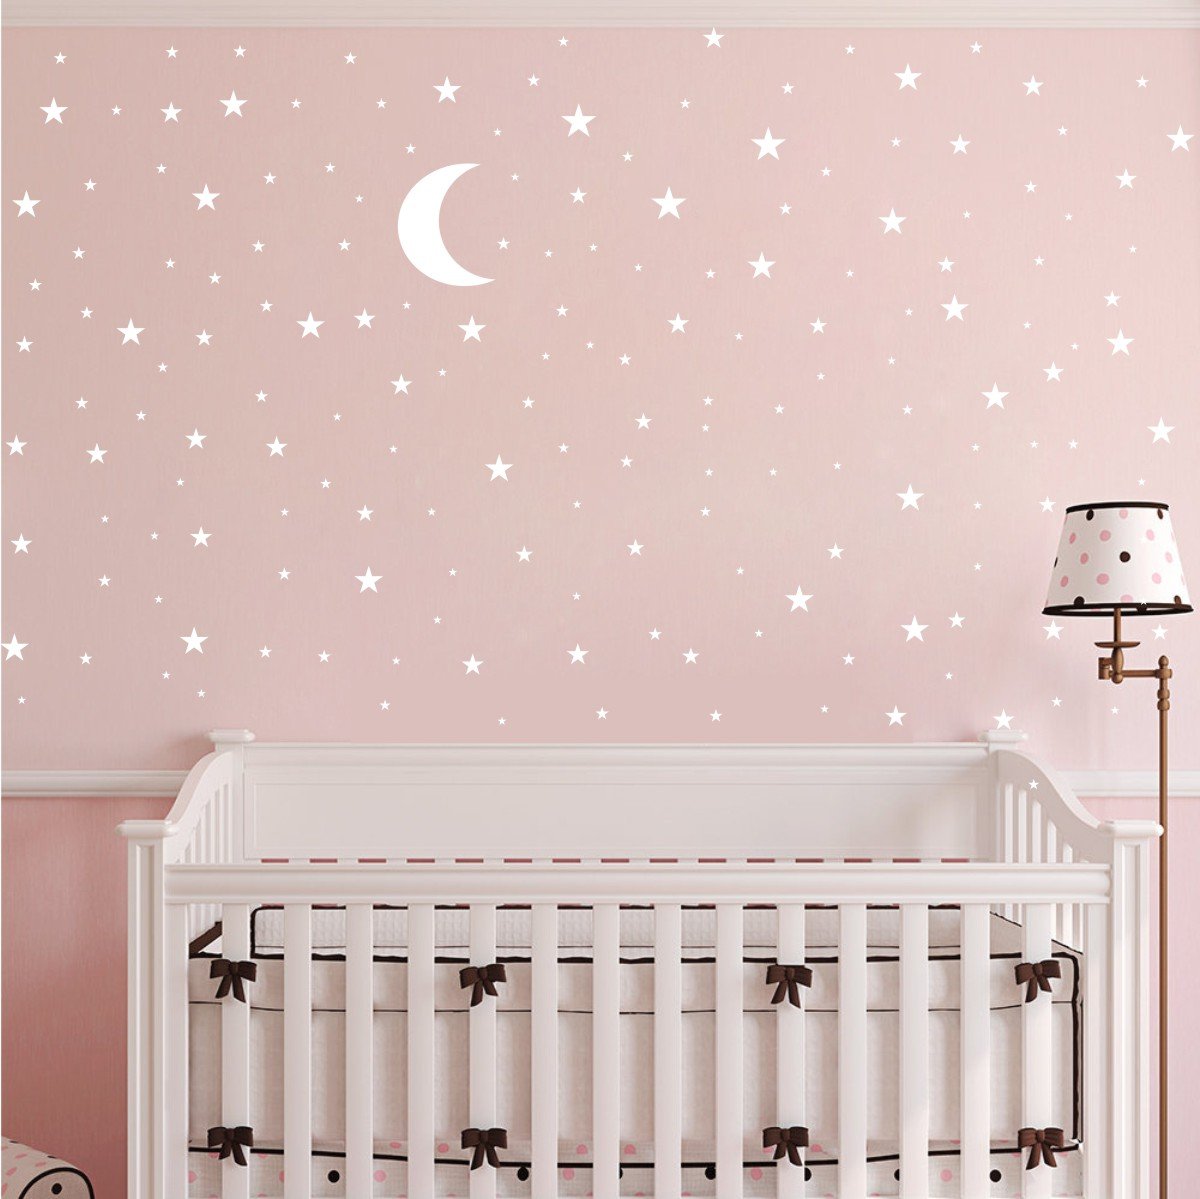 Moon and Stars Wall Decal Vinyl Sticker for Kids Boy Girls Baby Room Decoration Good Night Nursery Wall Decor Home House Bedroom Design YMX16 (White)